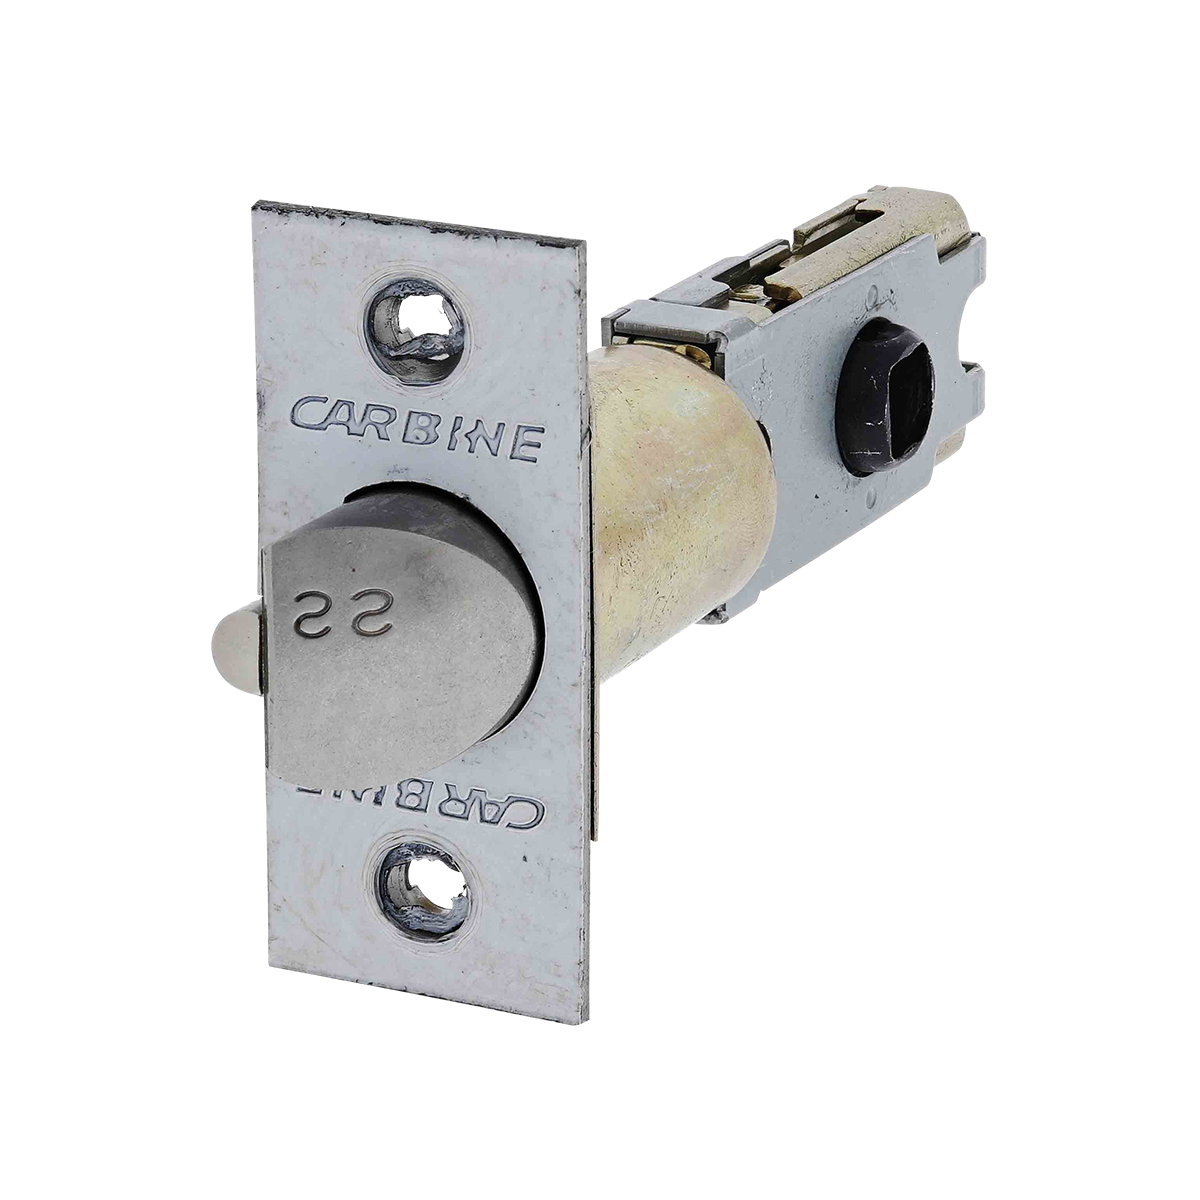 Carbine commercial fire rated tiebolt dead latching 60-70mm satin stainless steel latch - Premium Door Hardware from Carbine - Shop now at Firebox Australia